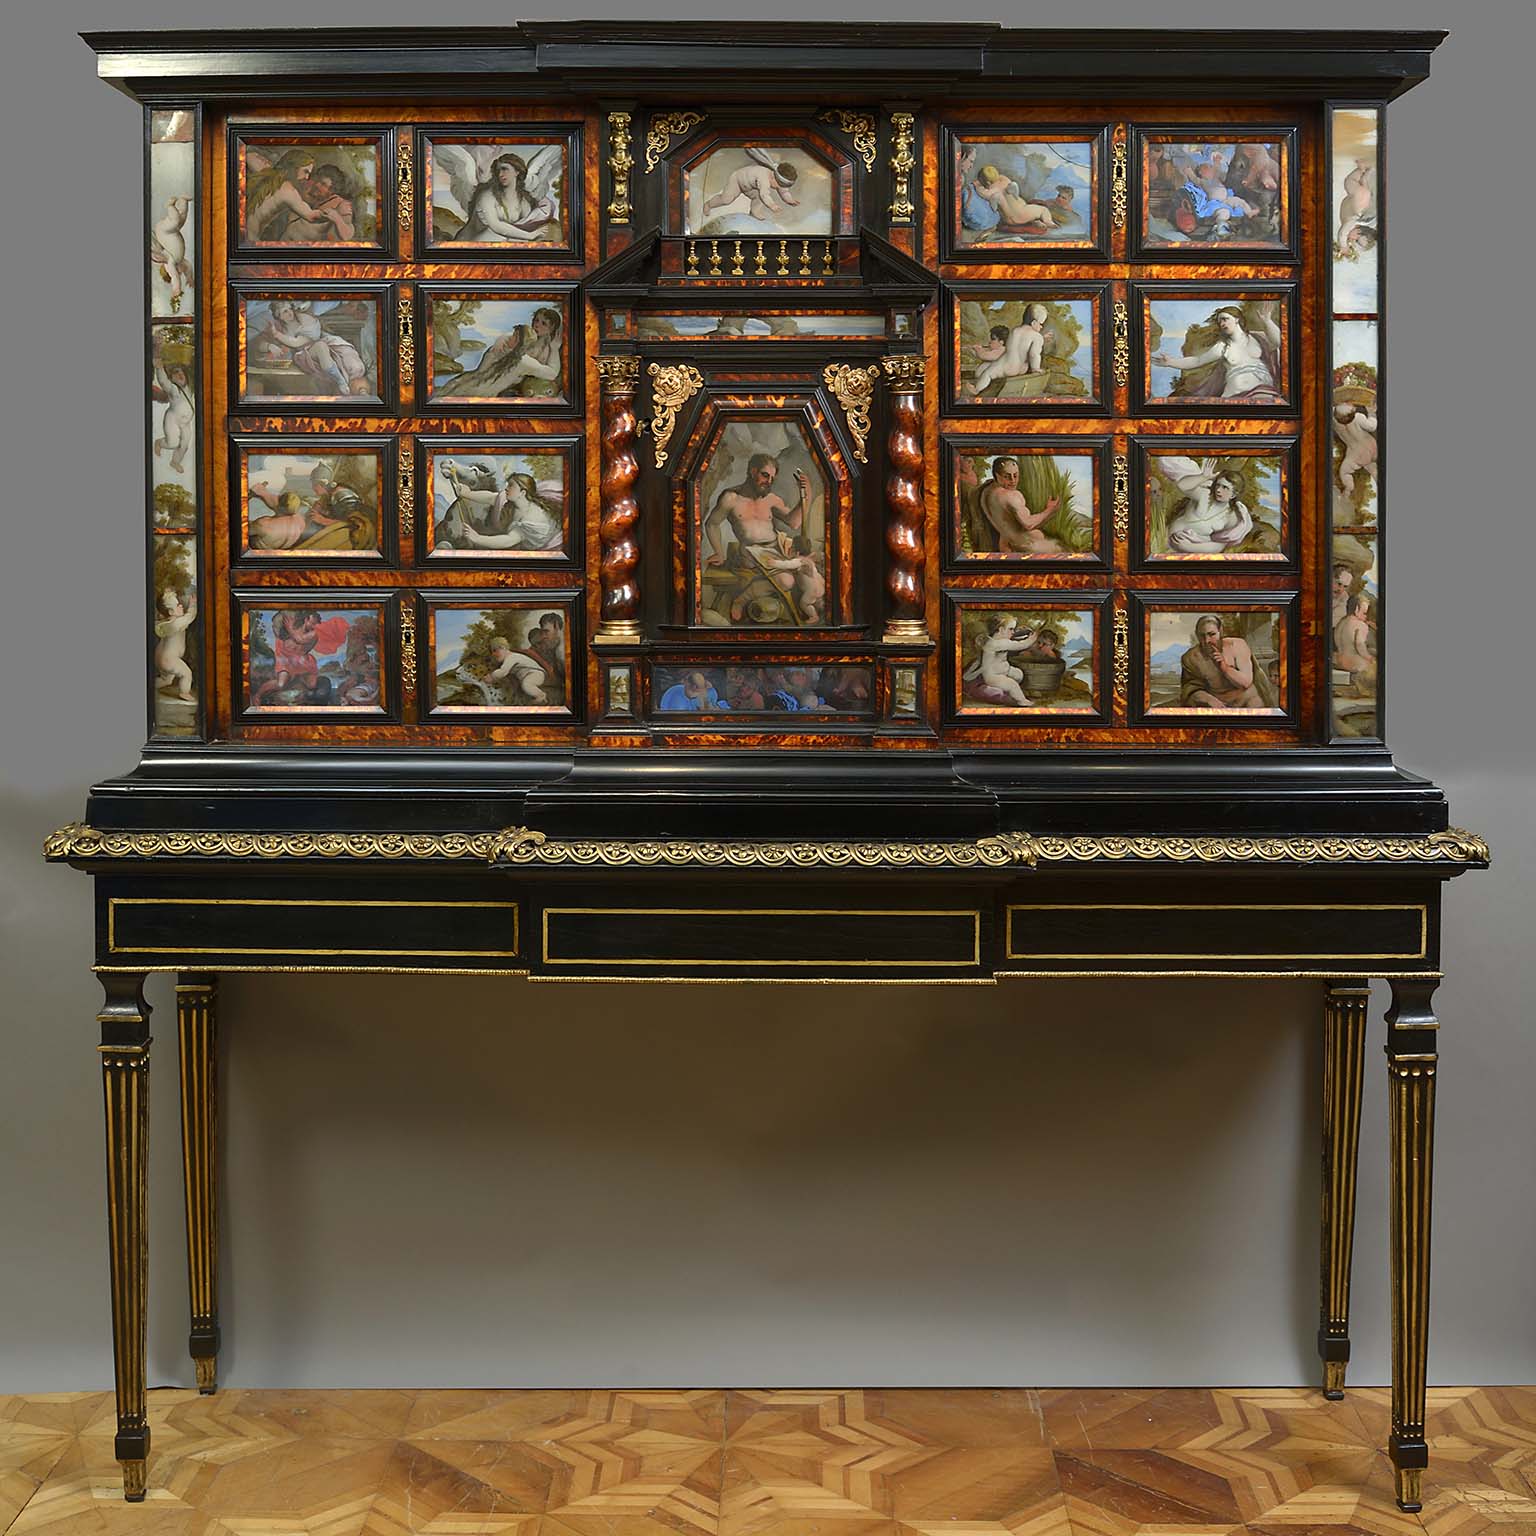 Architectural Cabinet in the manner of Luca Giordano